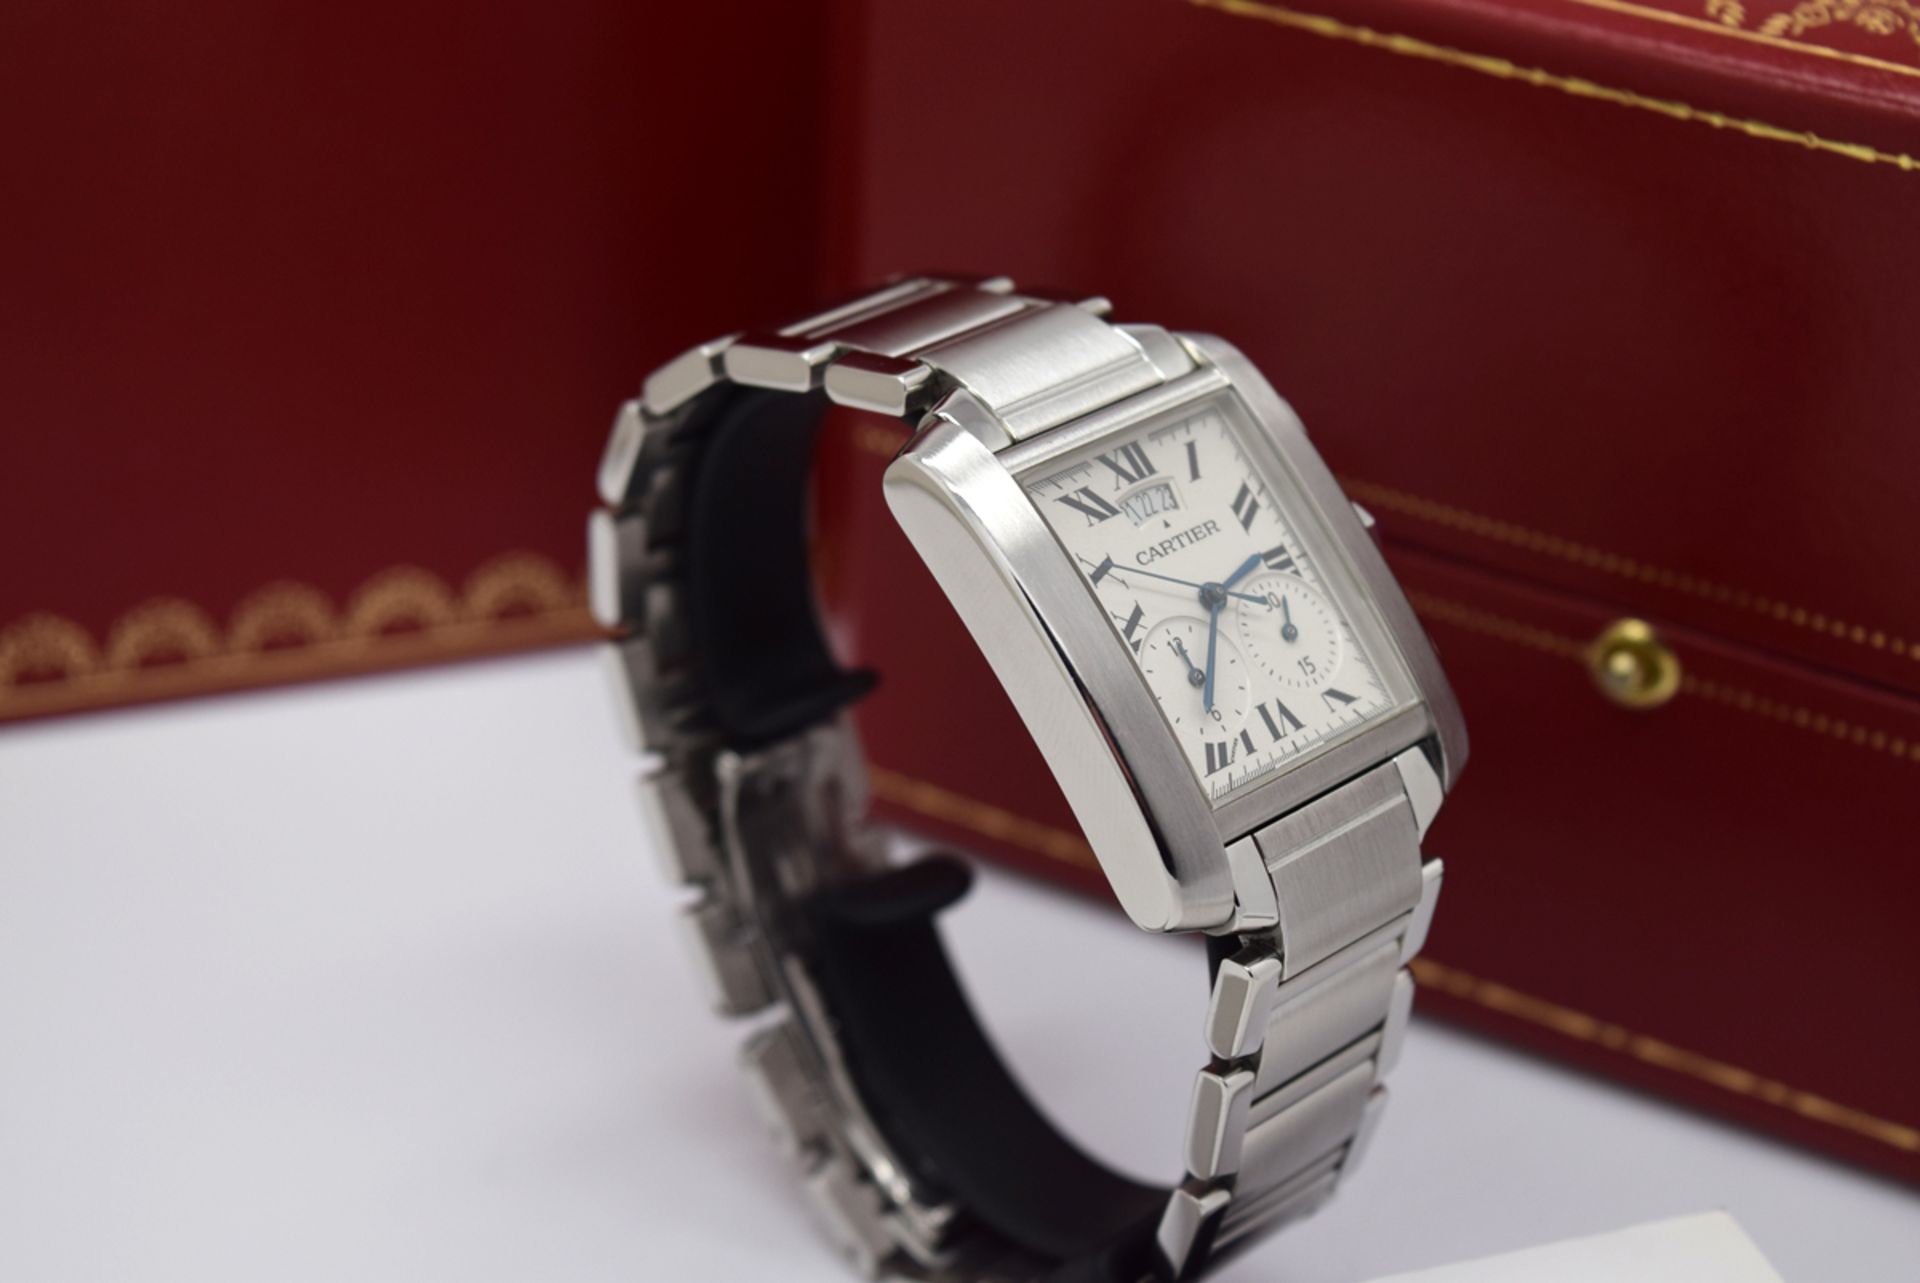 MENS CARTIER TANK CHRONOGRAPH - STAINLESS STEEL (2653 - W51024Q3) - Image 8 of 12